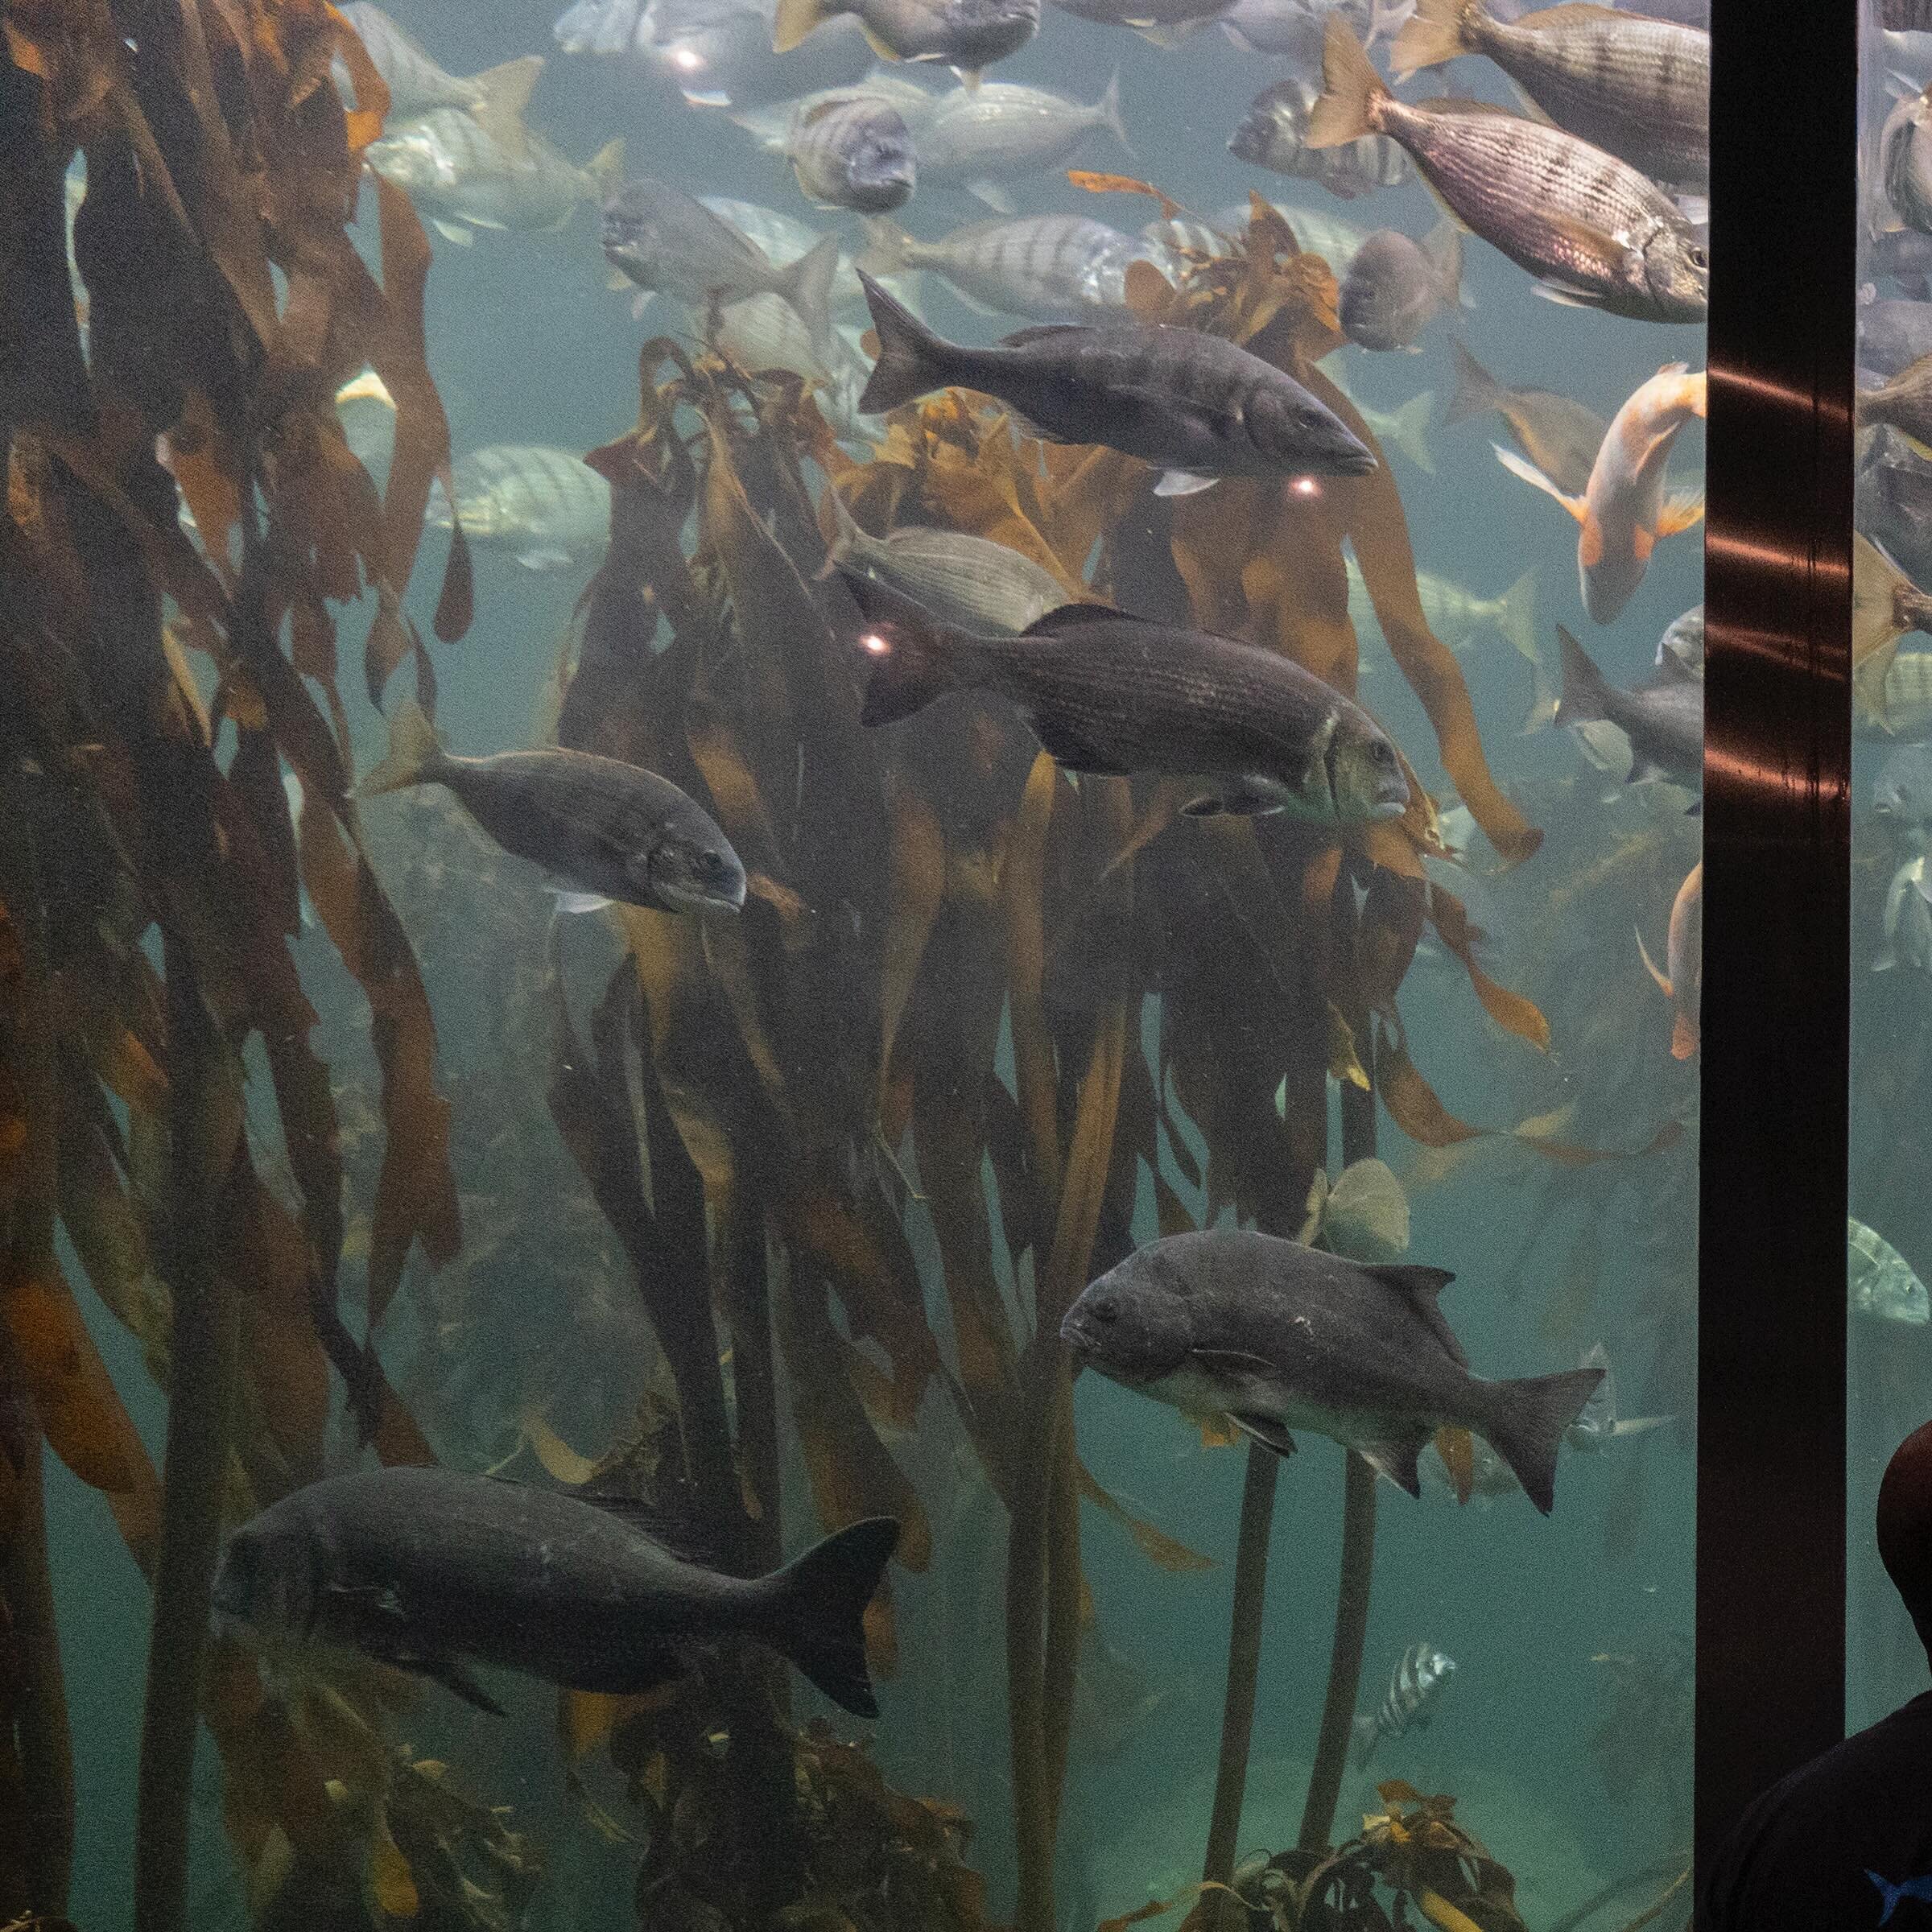 A family visits the Kelp Forest Exhibit at the Two Oceans Aquarium in Cape Town, South Africa, August 13, 2023. Adriane Ohanesian for the Bulletin of the Atomic Scientists

Kelp forests cover six to seven million square kilometers of ocean&mdash;an a